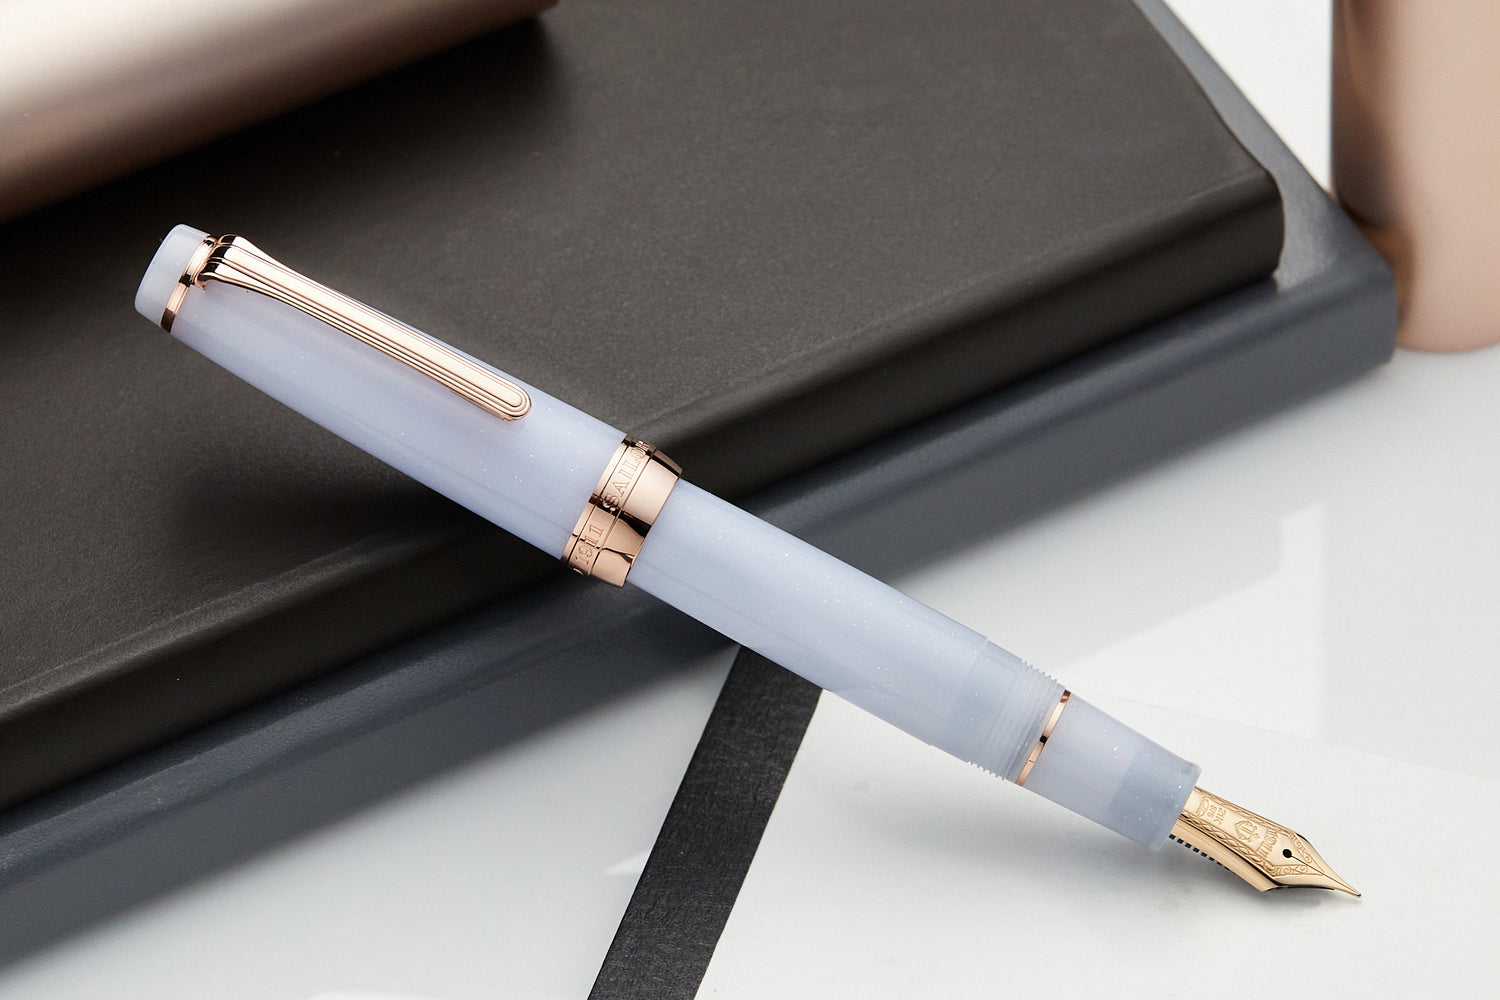 Sailor Pro Gear Fountain Pen - Soul of Chess (Limited Edition) - The Goulet  Pen Company